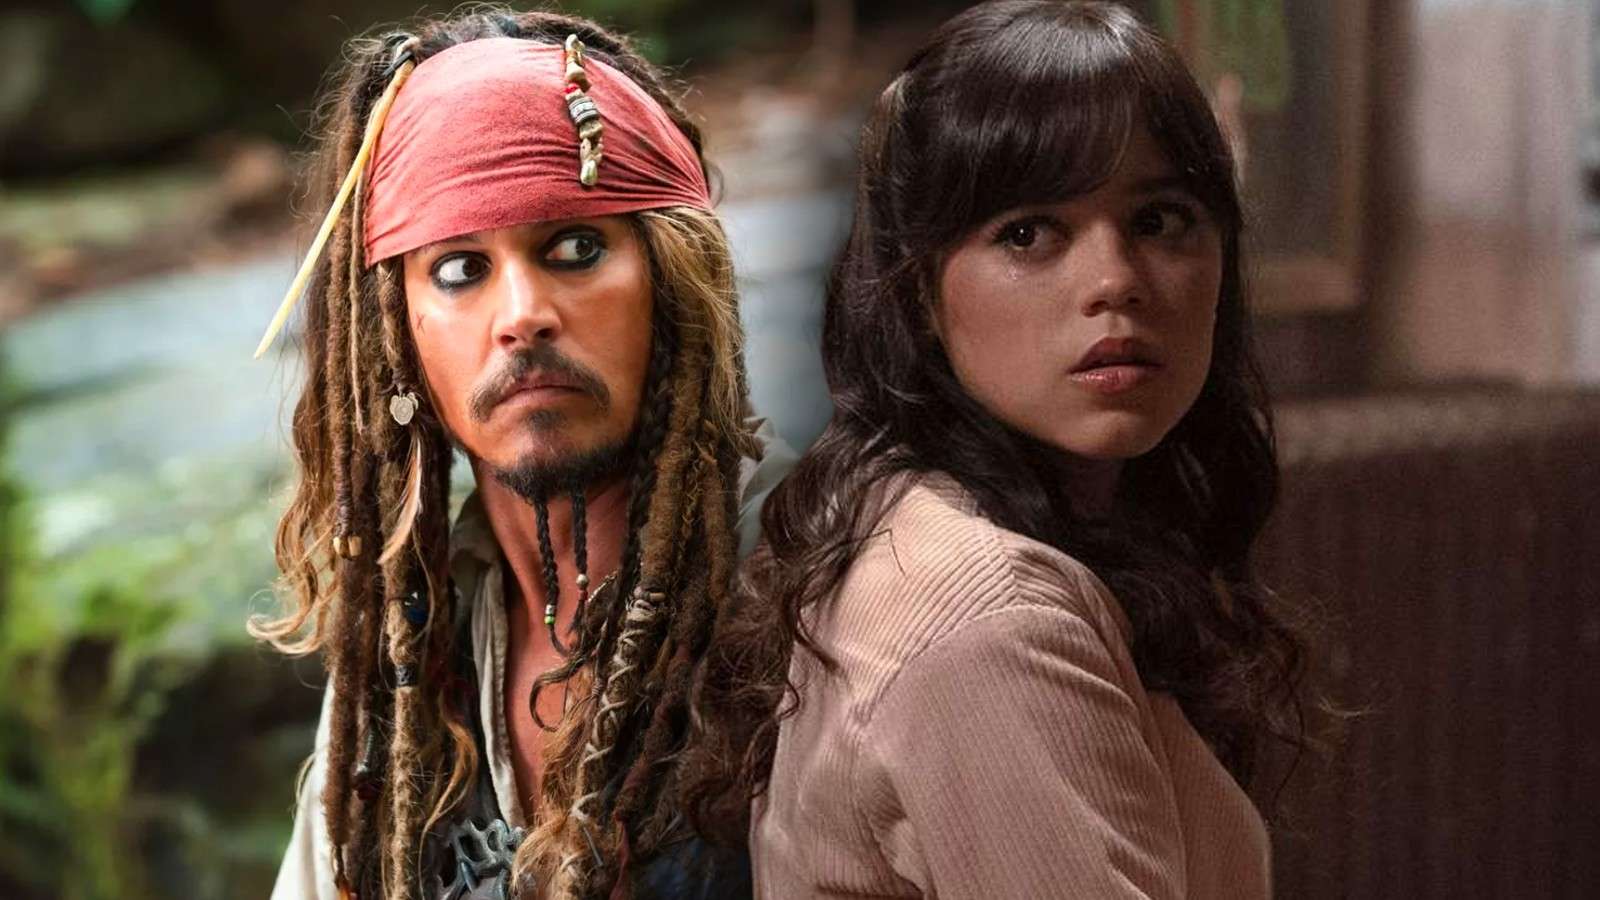 Johnny Depp as Jack Sparrow in Pirates of the Caribbean and Jenna Ortega